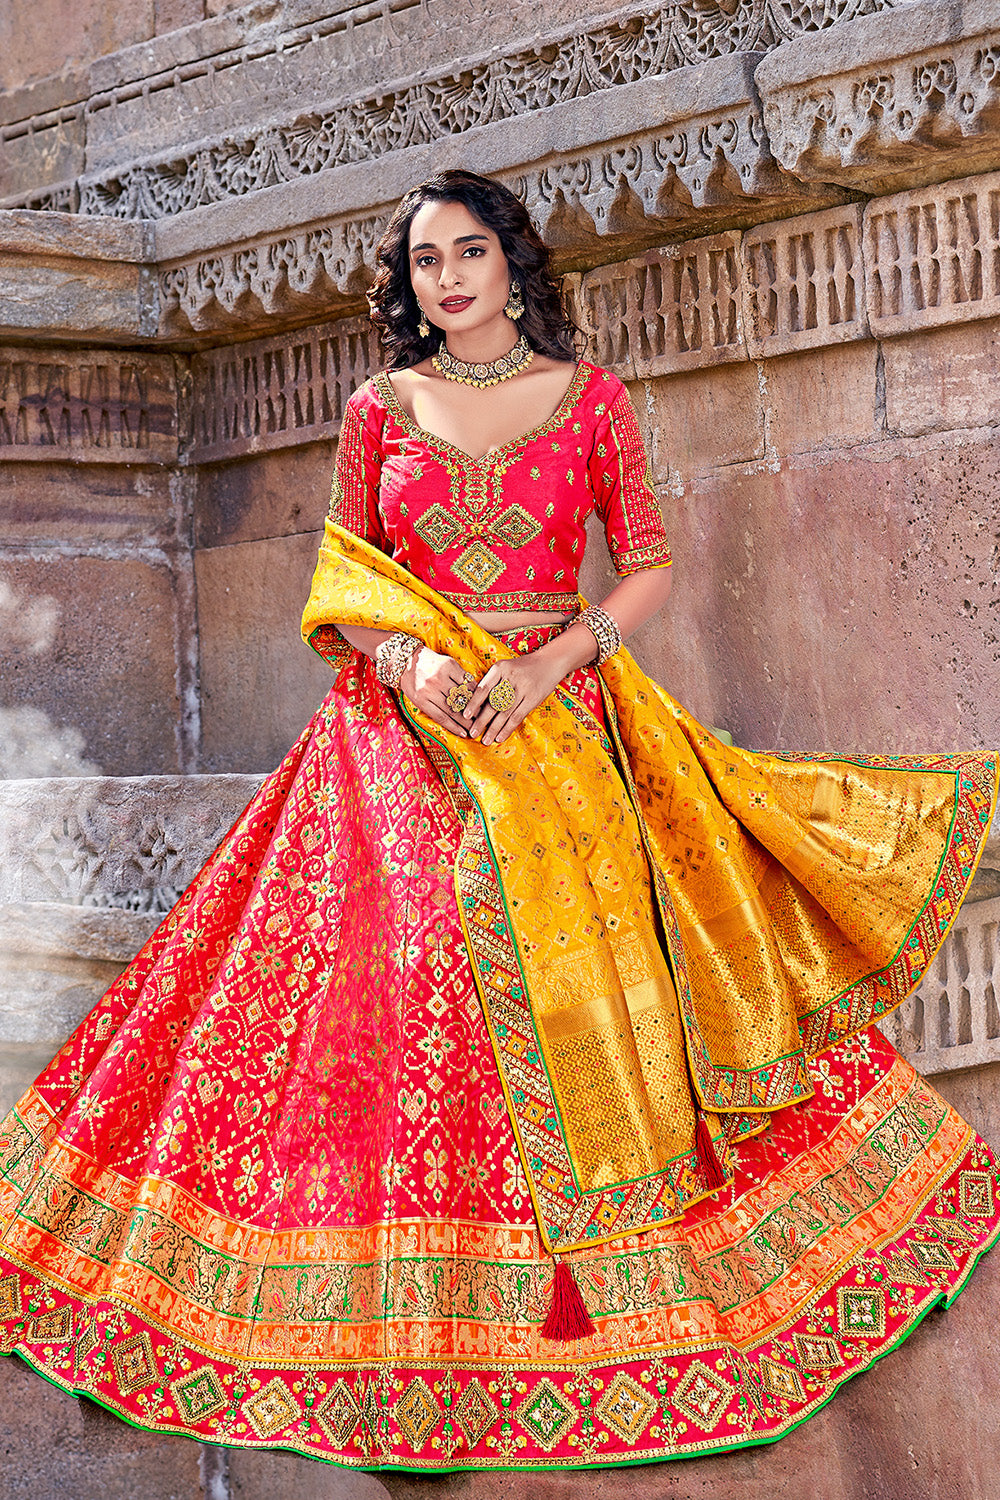 Photo of Red and gold bridal lehenga with yellow dupatta